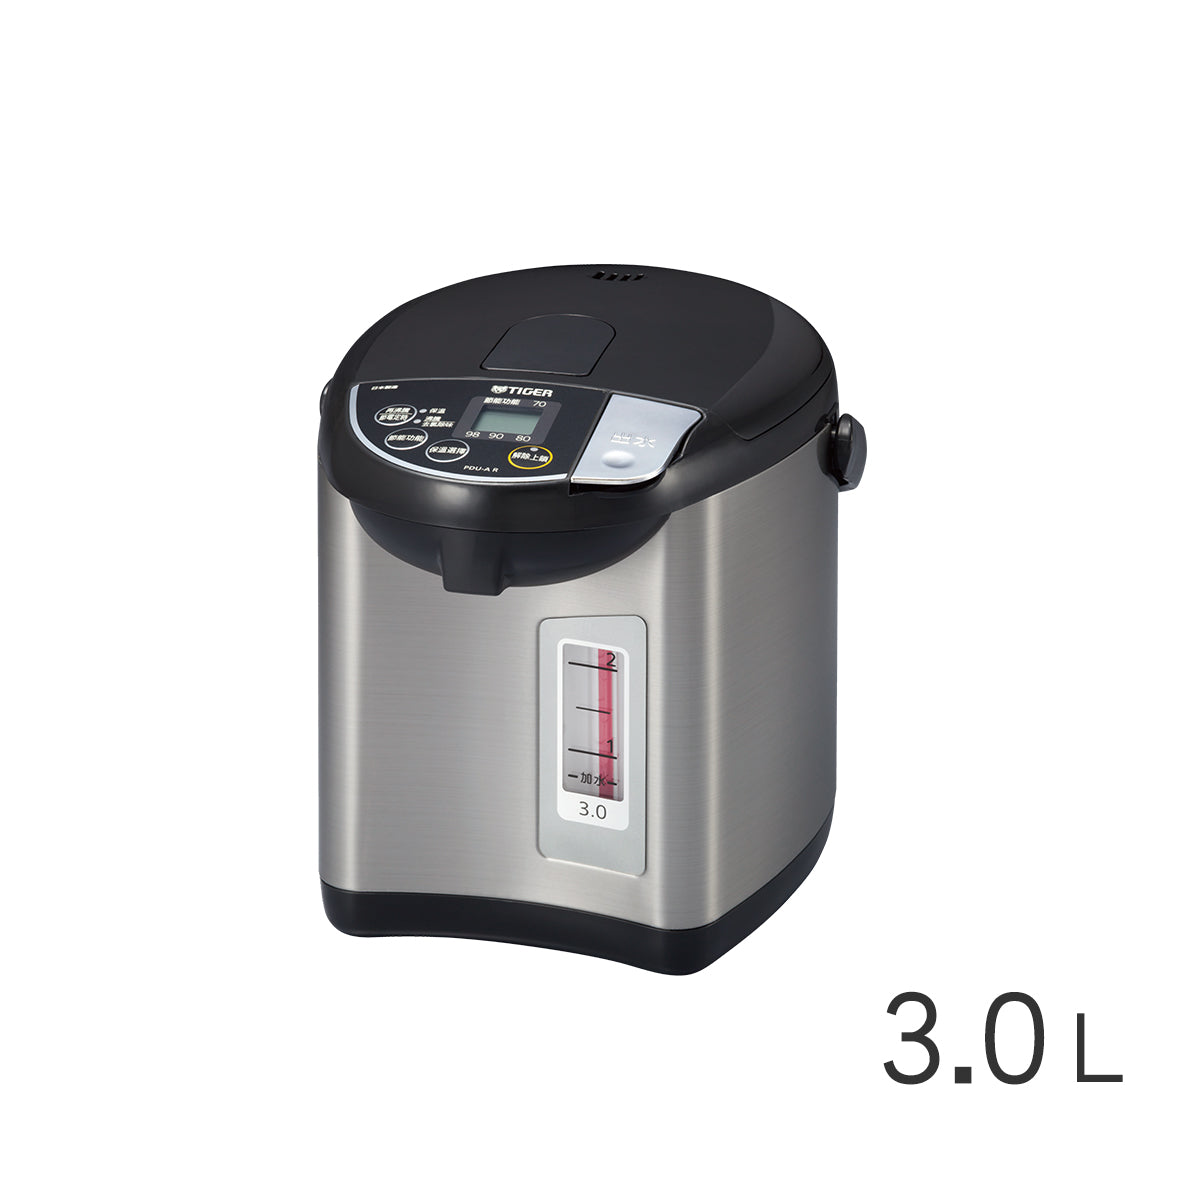 Tiger PDU-A30U-K Electric Water Boiler and Warmer, Stainless Black,  3.0-Liter